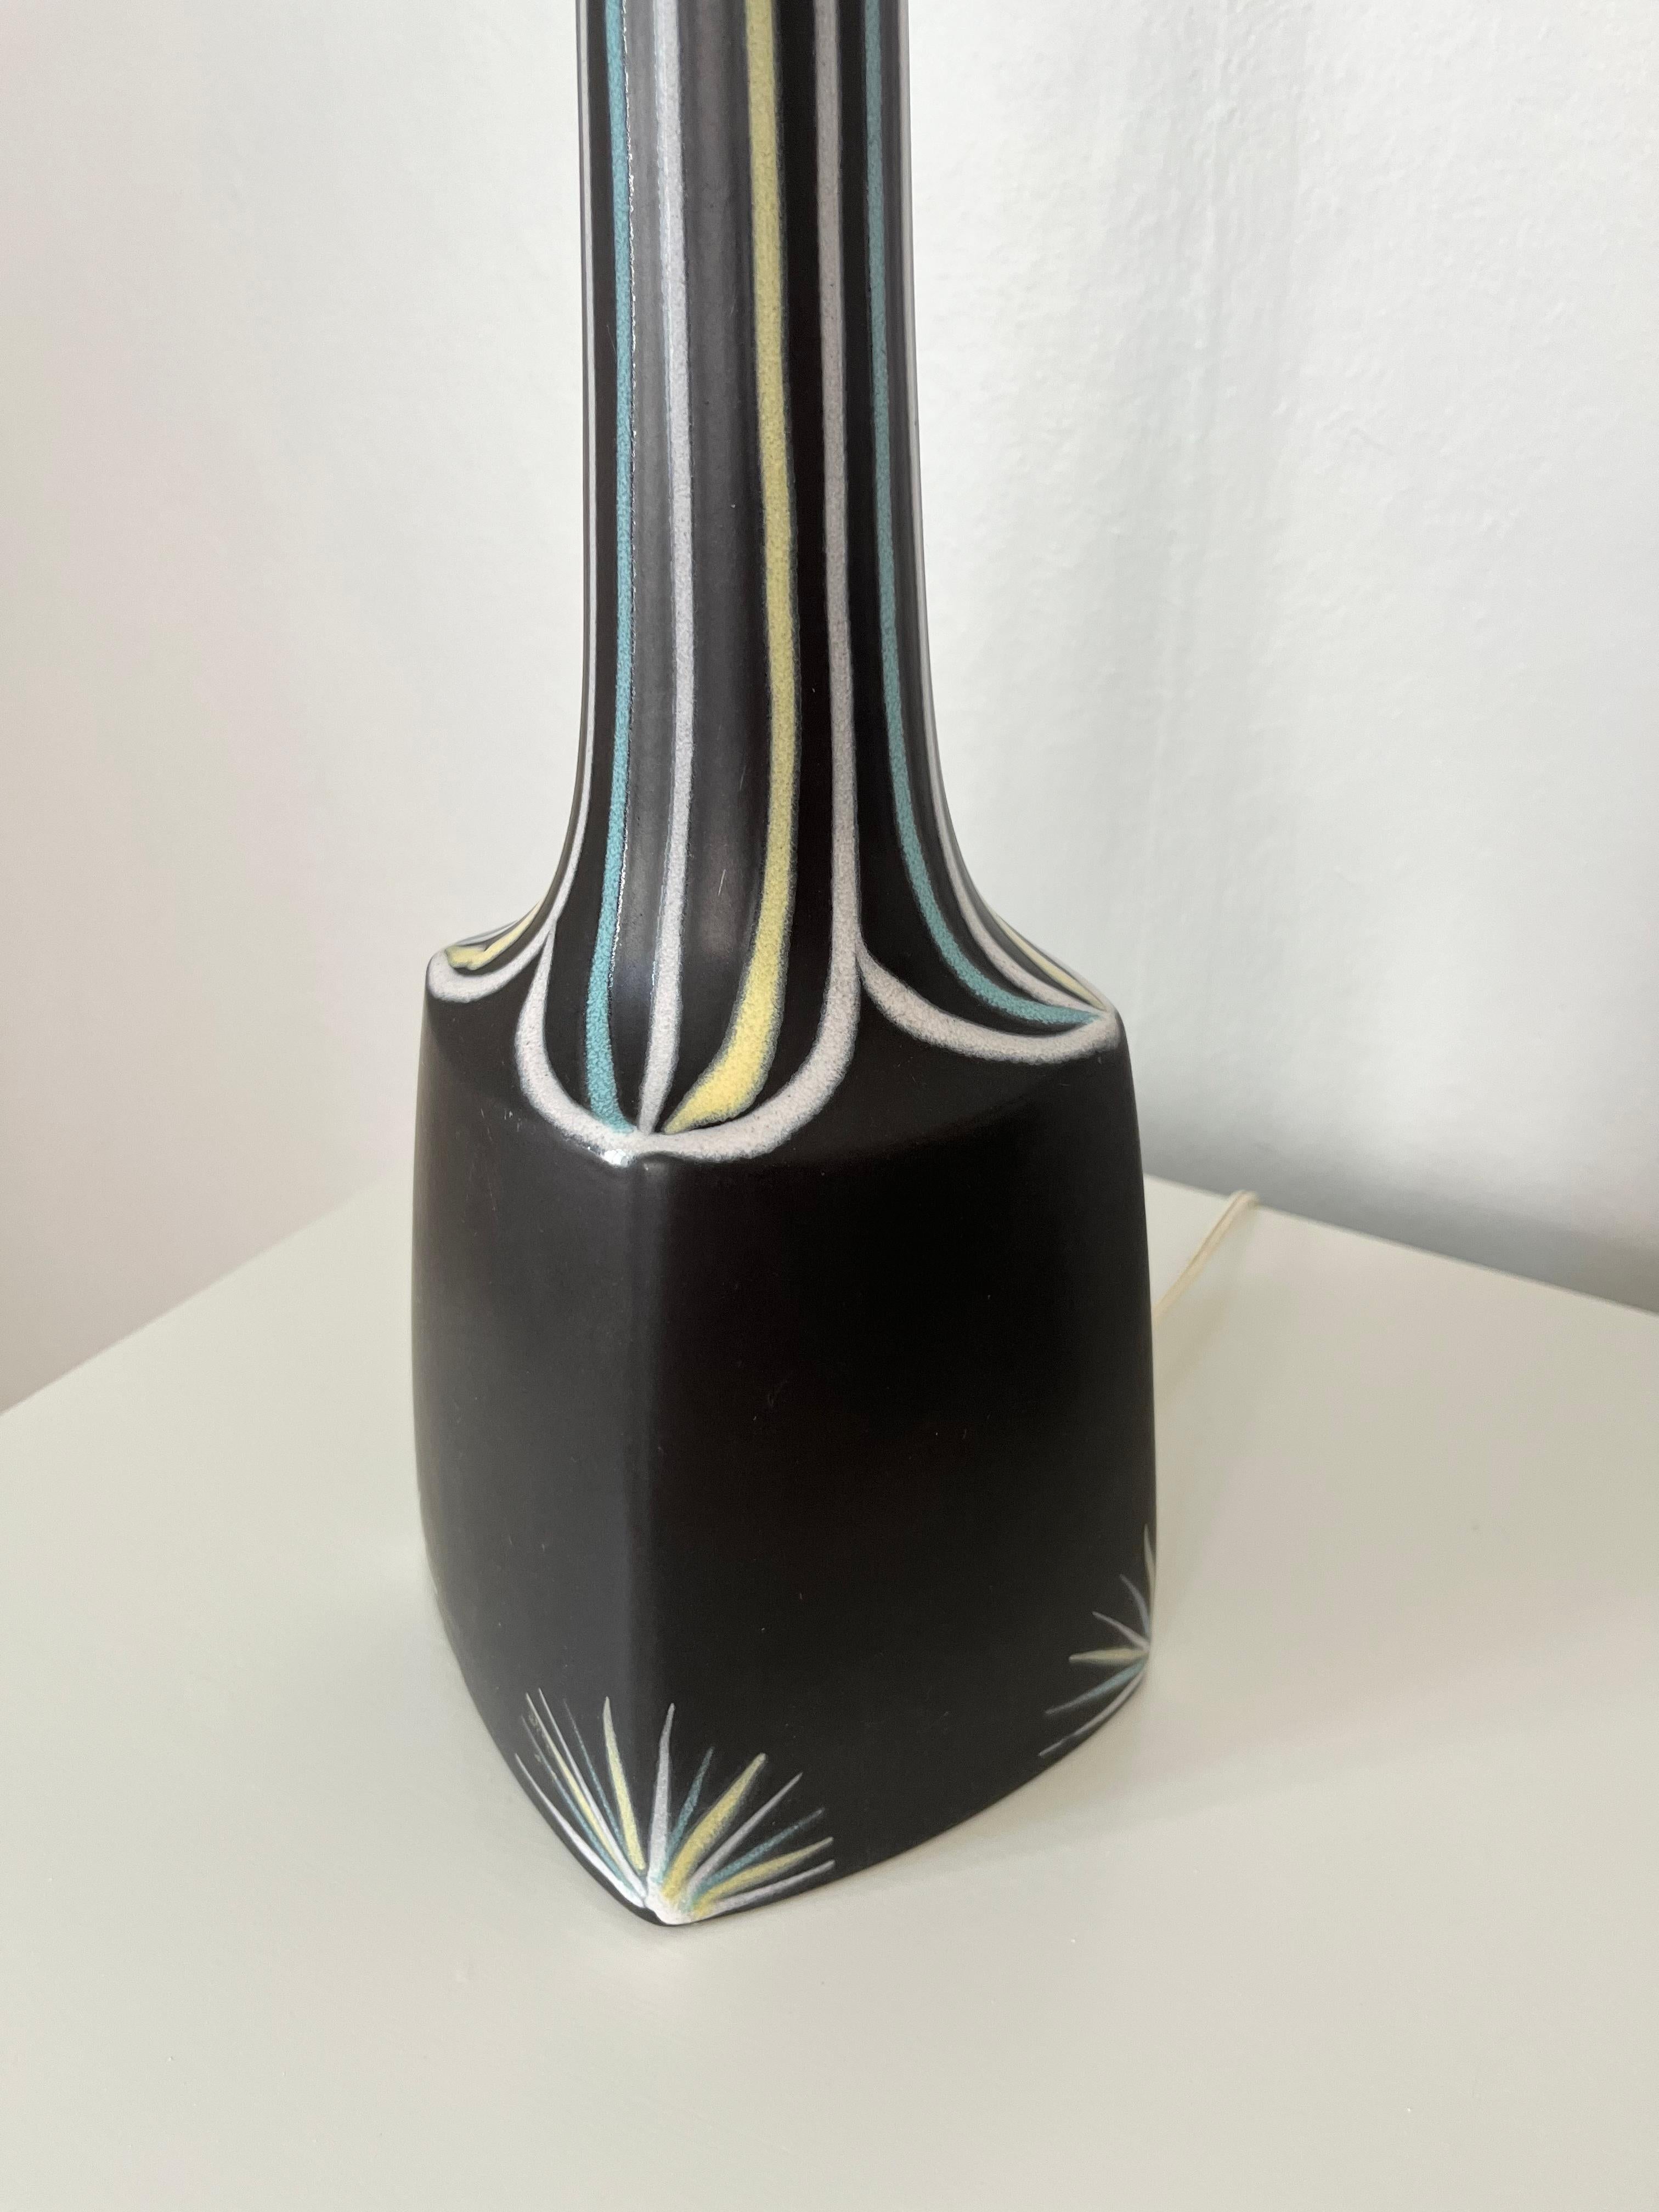 Ceramic 1960s tall Danish ceramics table lamp by Svend Aage Holm-Sørensen for Søholm For Sale